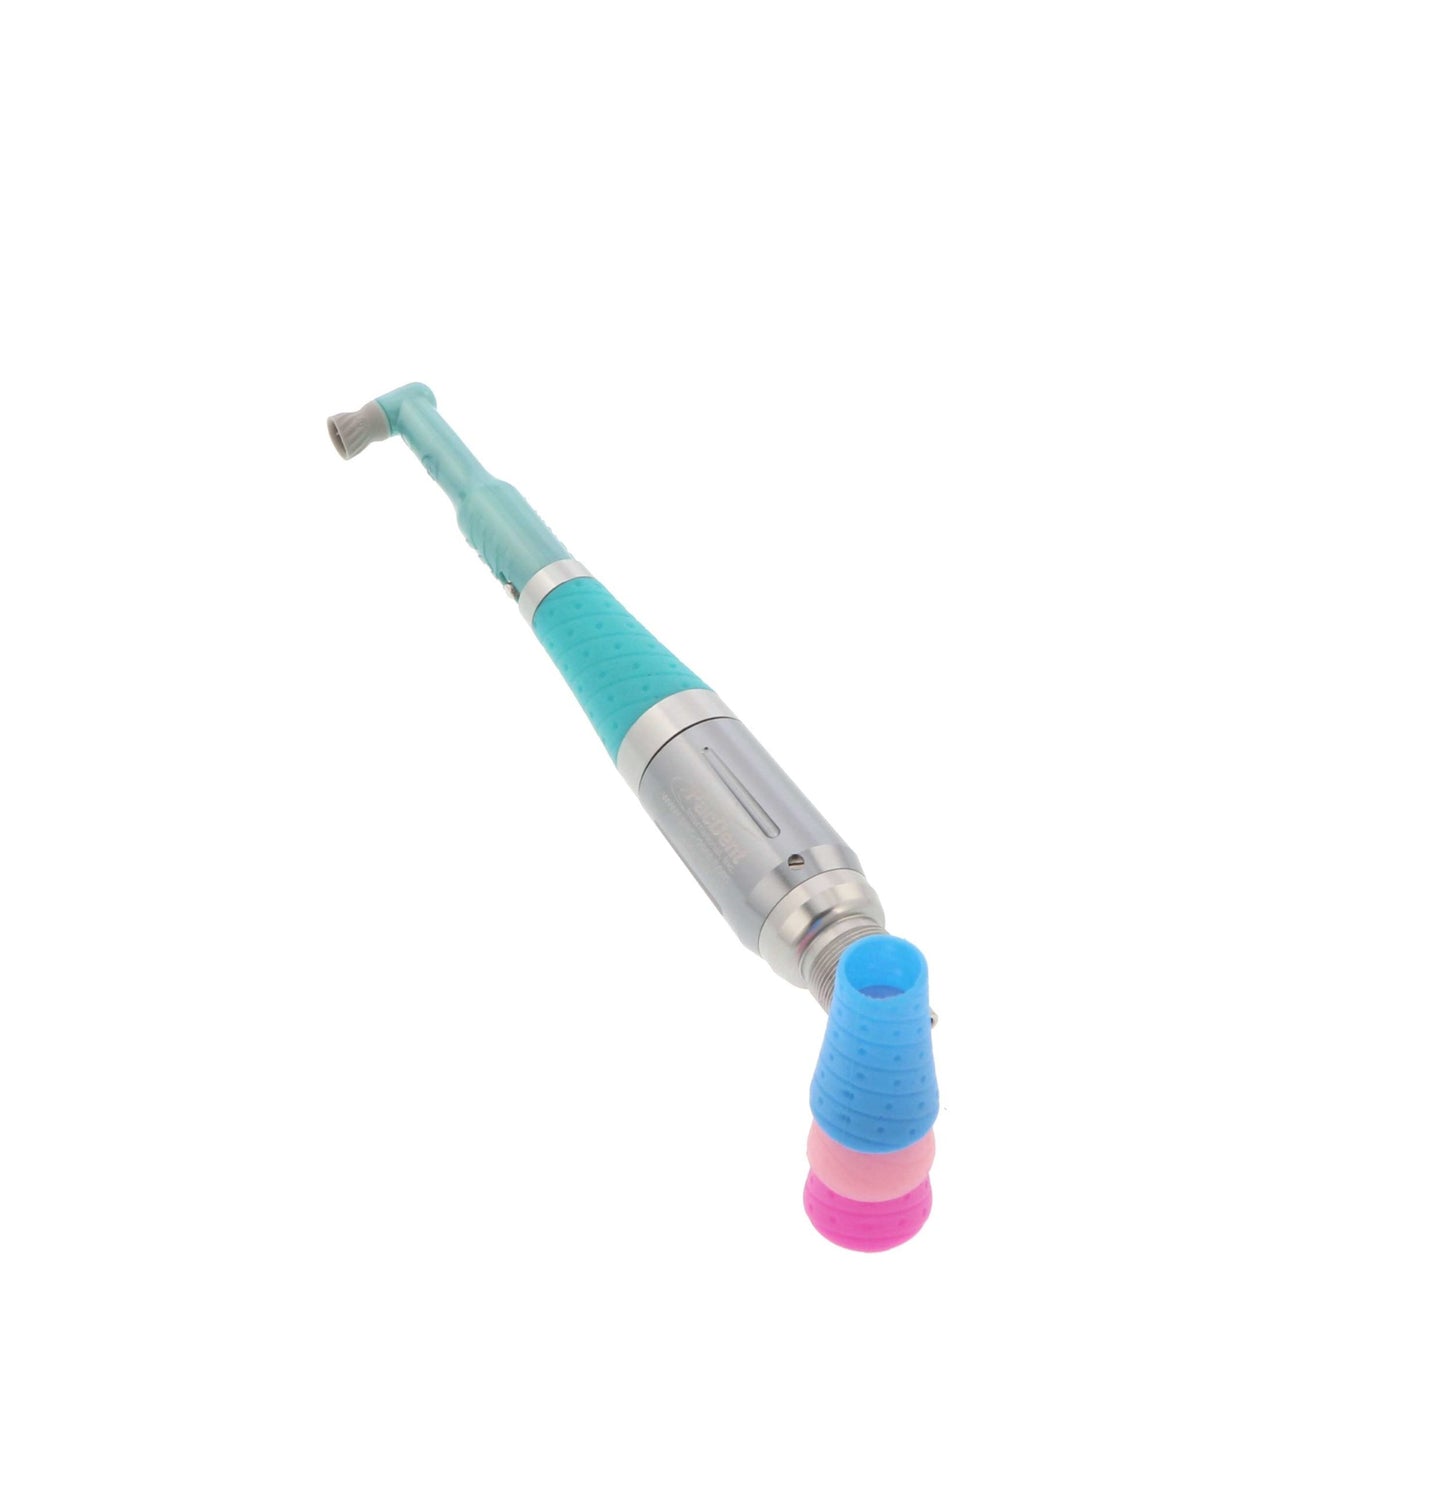 ProMate and accessories - 1 x Hygiene Handpiece with 3 X silicon grips